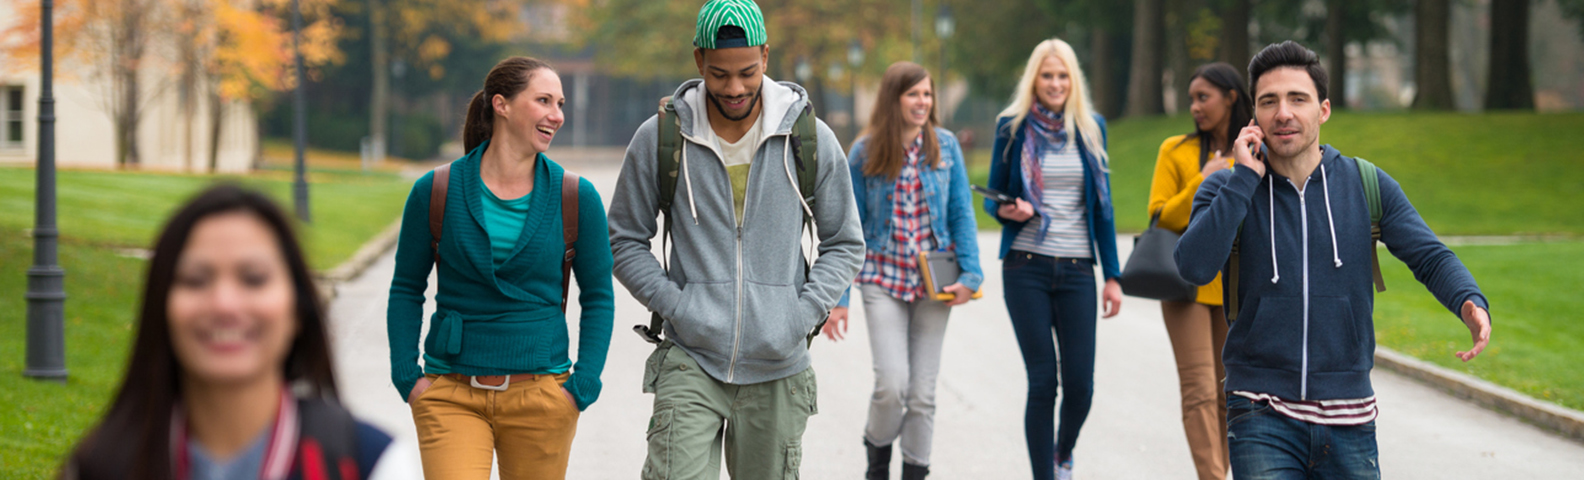 A group of students walking through campus